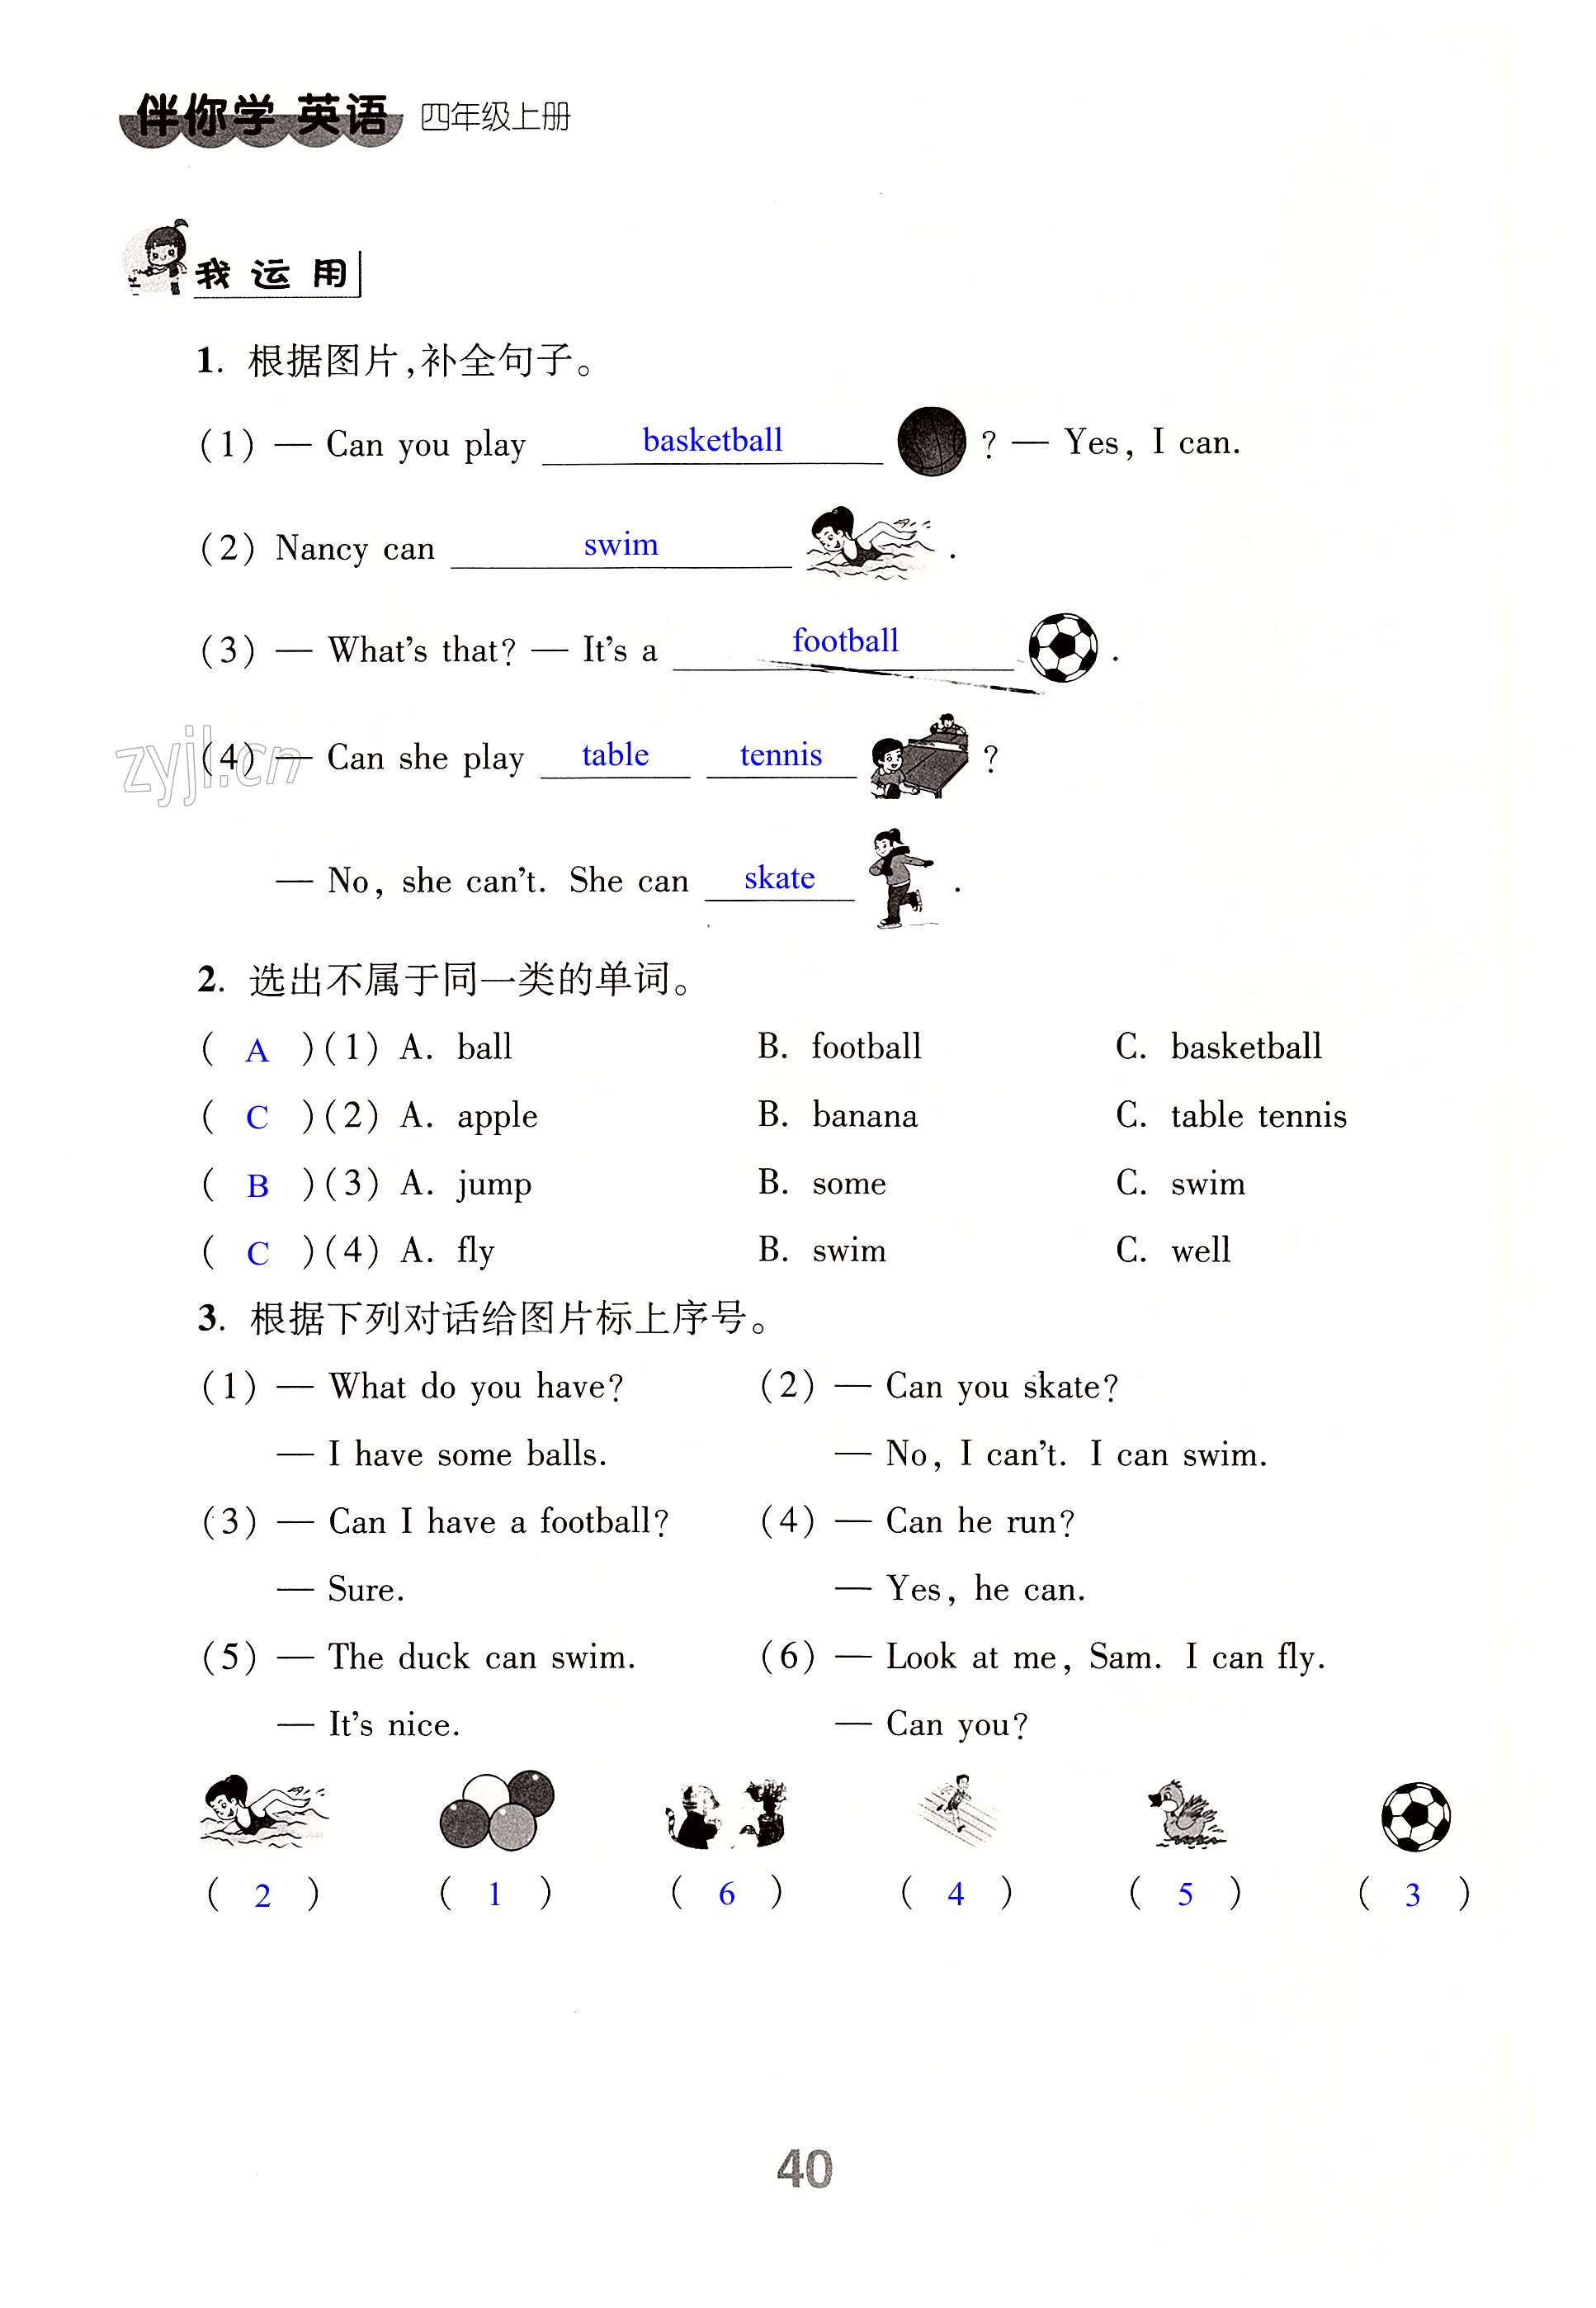 Unit 4 I can play basketball - 第40页